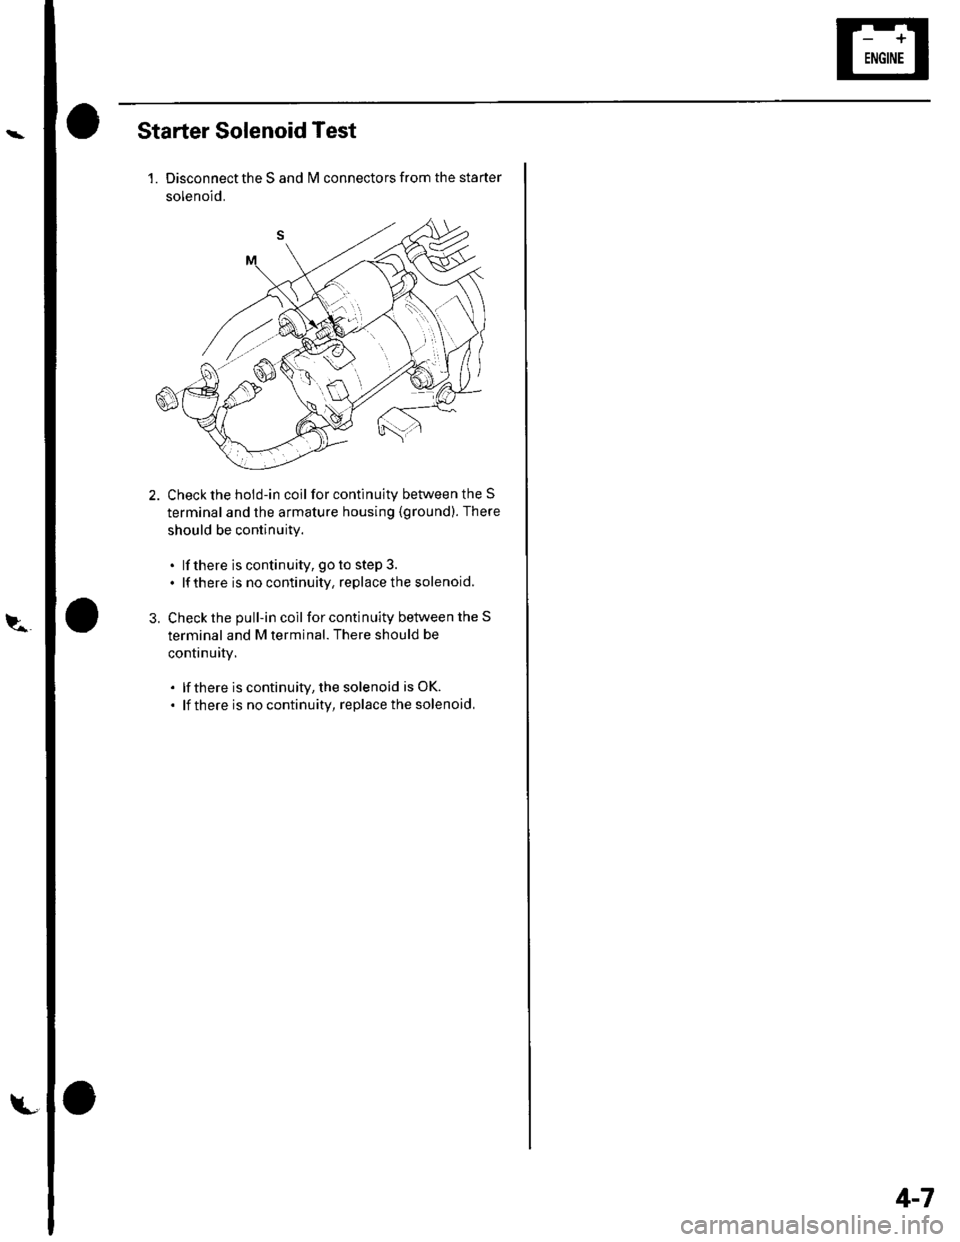 HONDA CIVIC 2002 7.G Workshop Manual et
Starter Solenoid Test
1. Disconnect the S and lvl connectors from the starter
solenoid.
2. Check the hold-in coil for continuity between the S
terminal and the armature housing (ground). There
shou